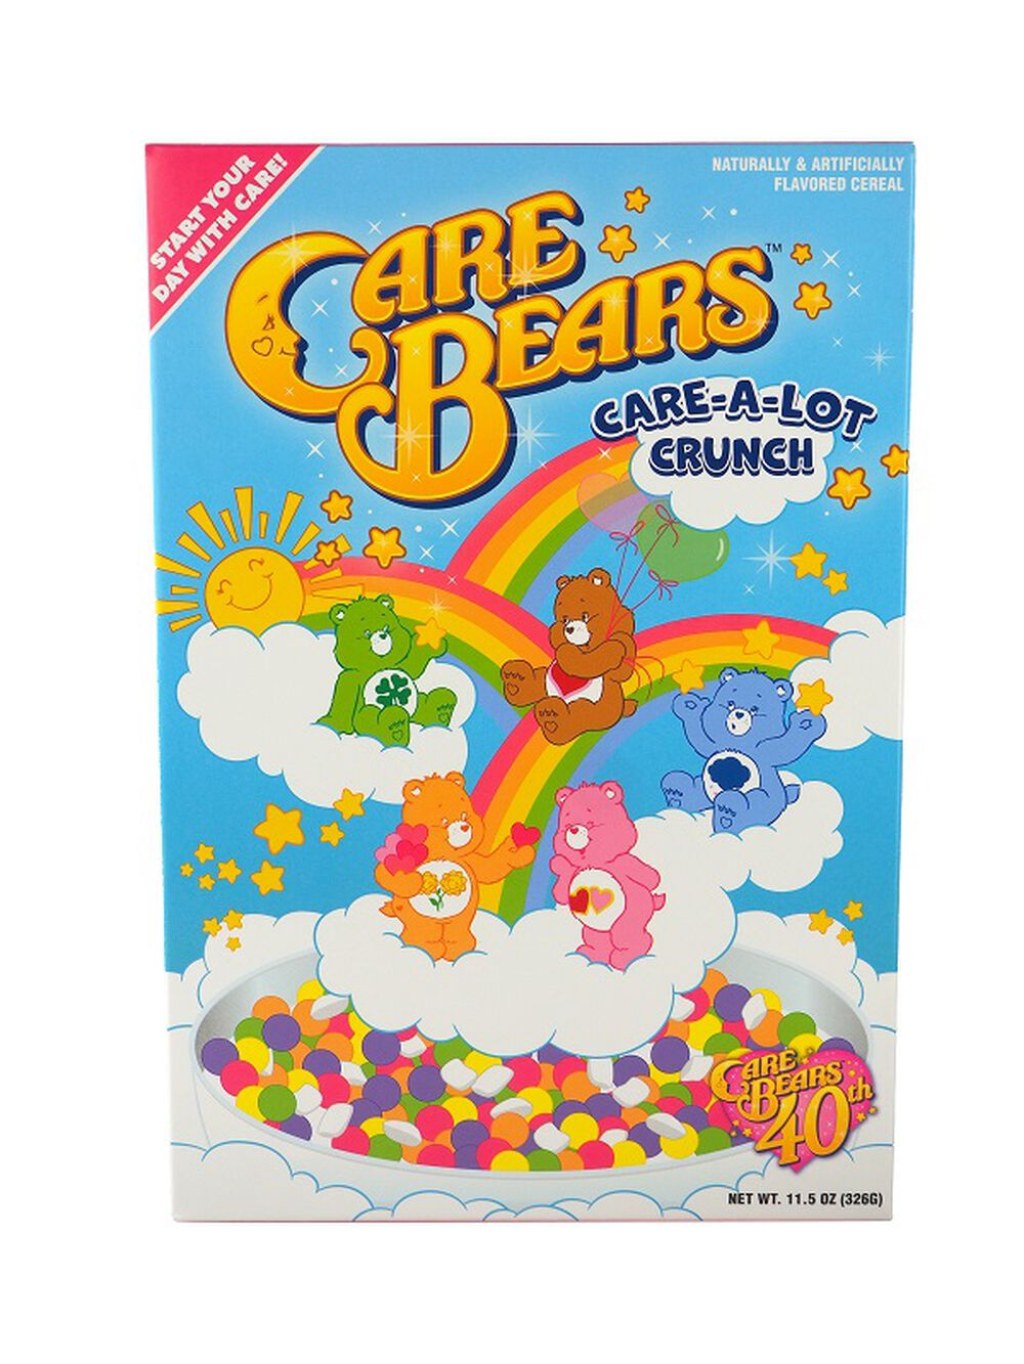 Picture of: Care Bears Care-A-Lot Crunch Cereal